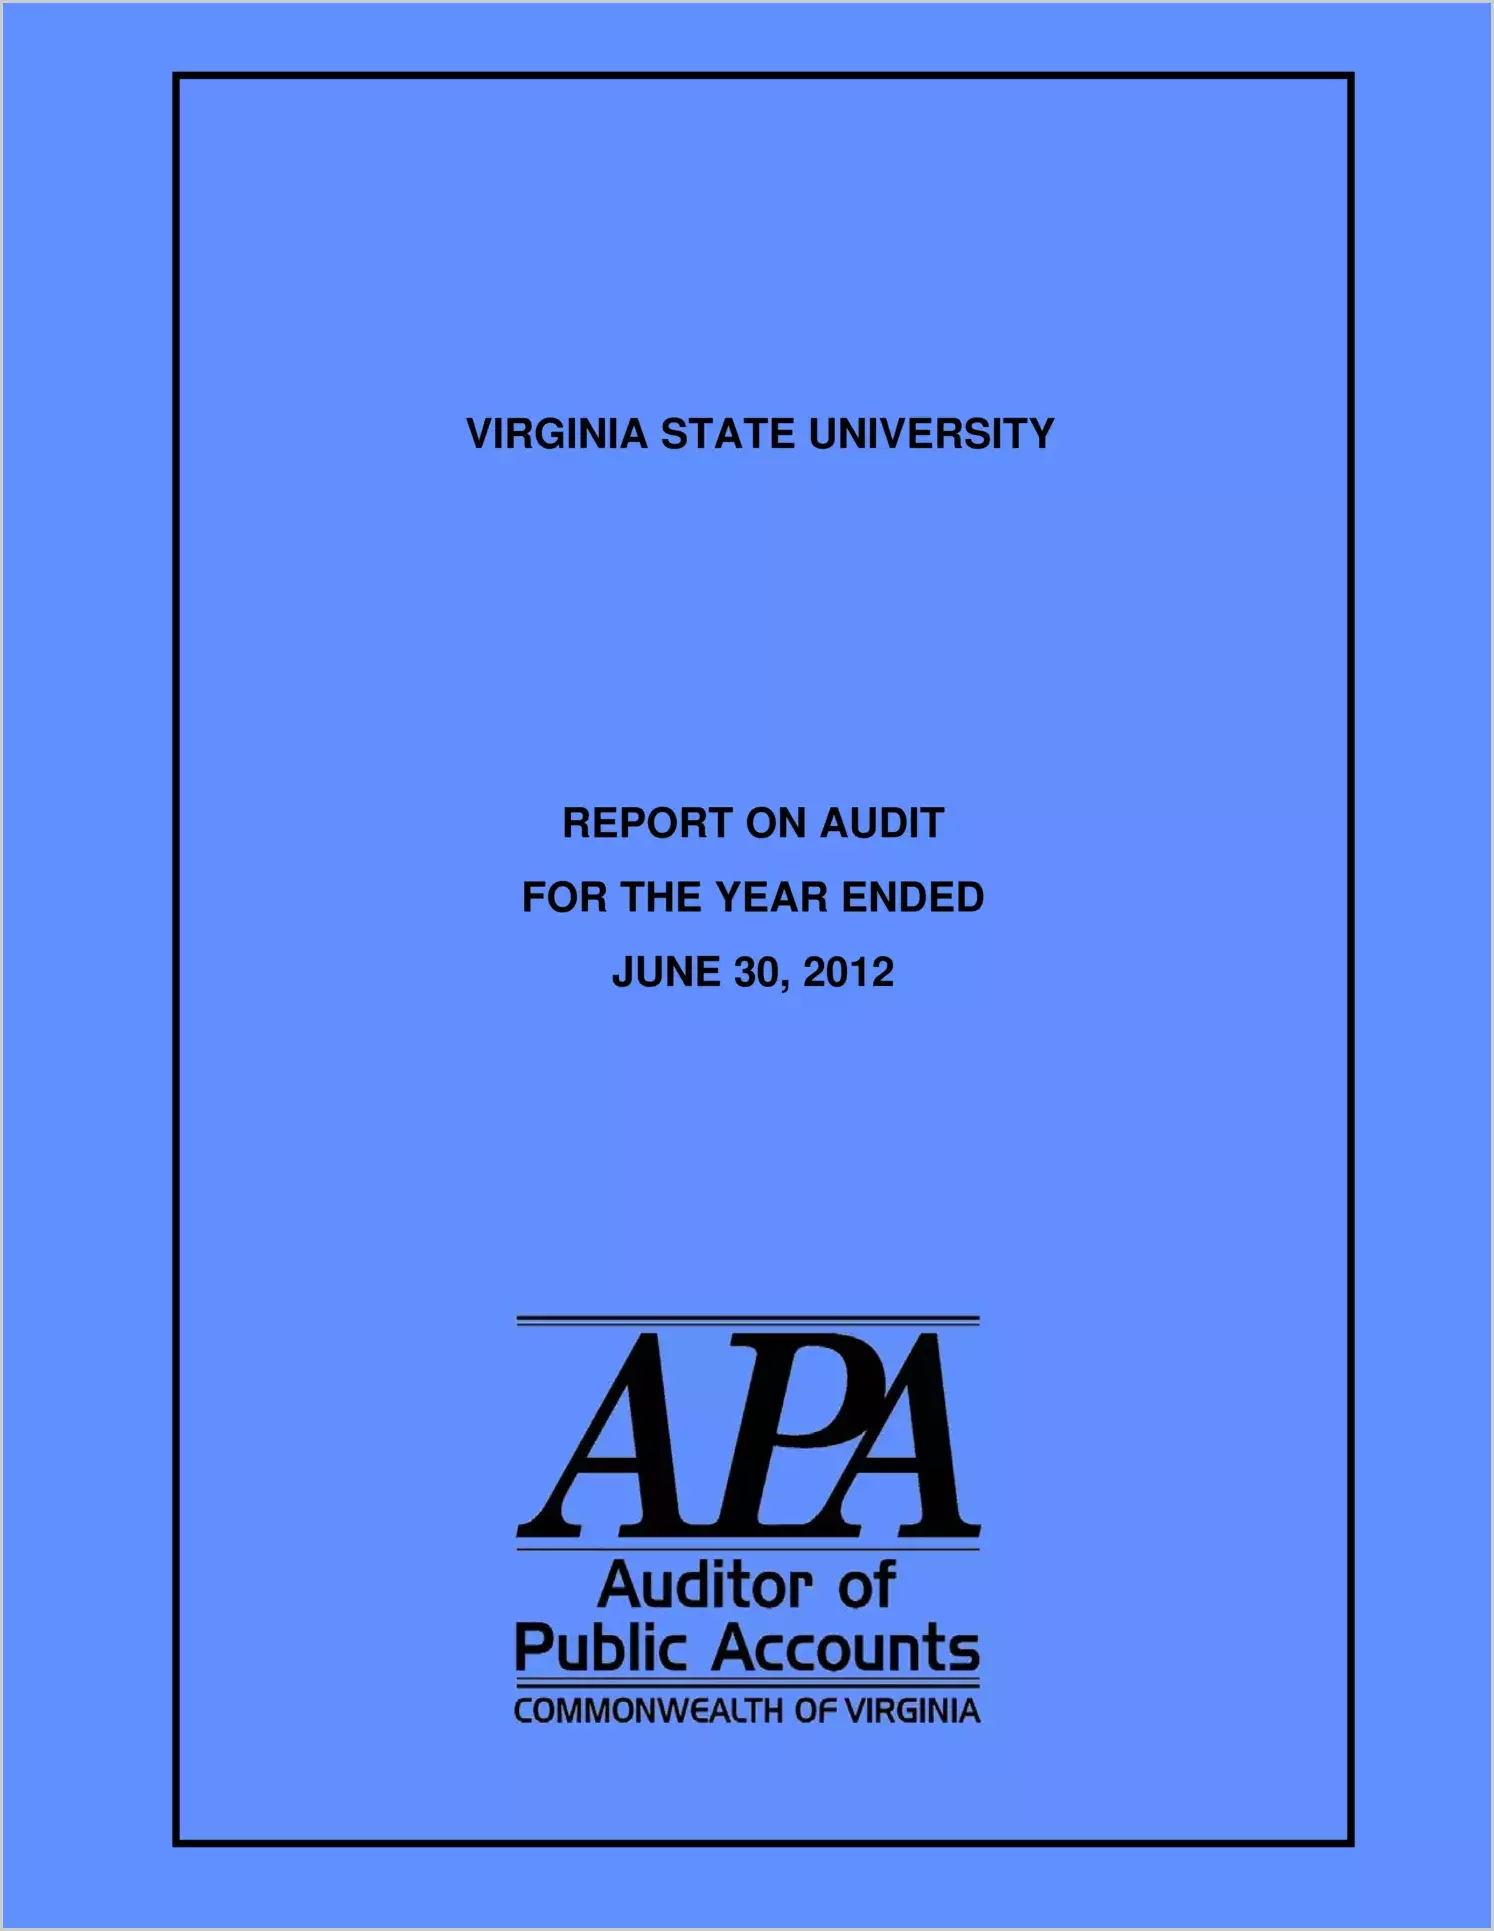 Virginia State University for the year ended June 30, 2012